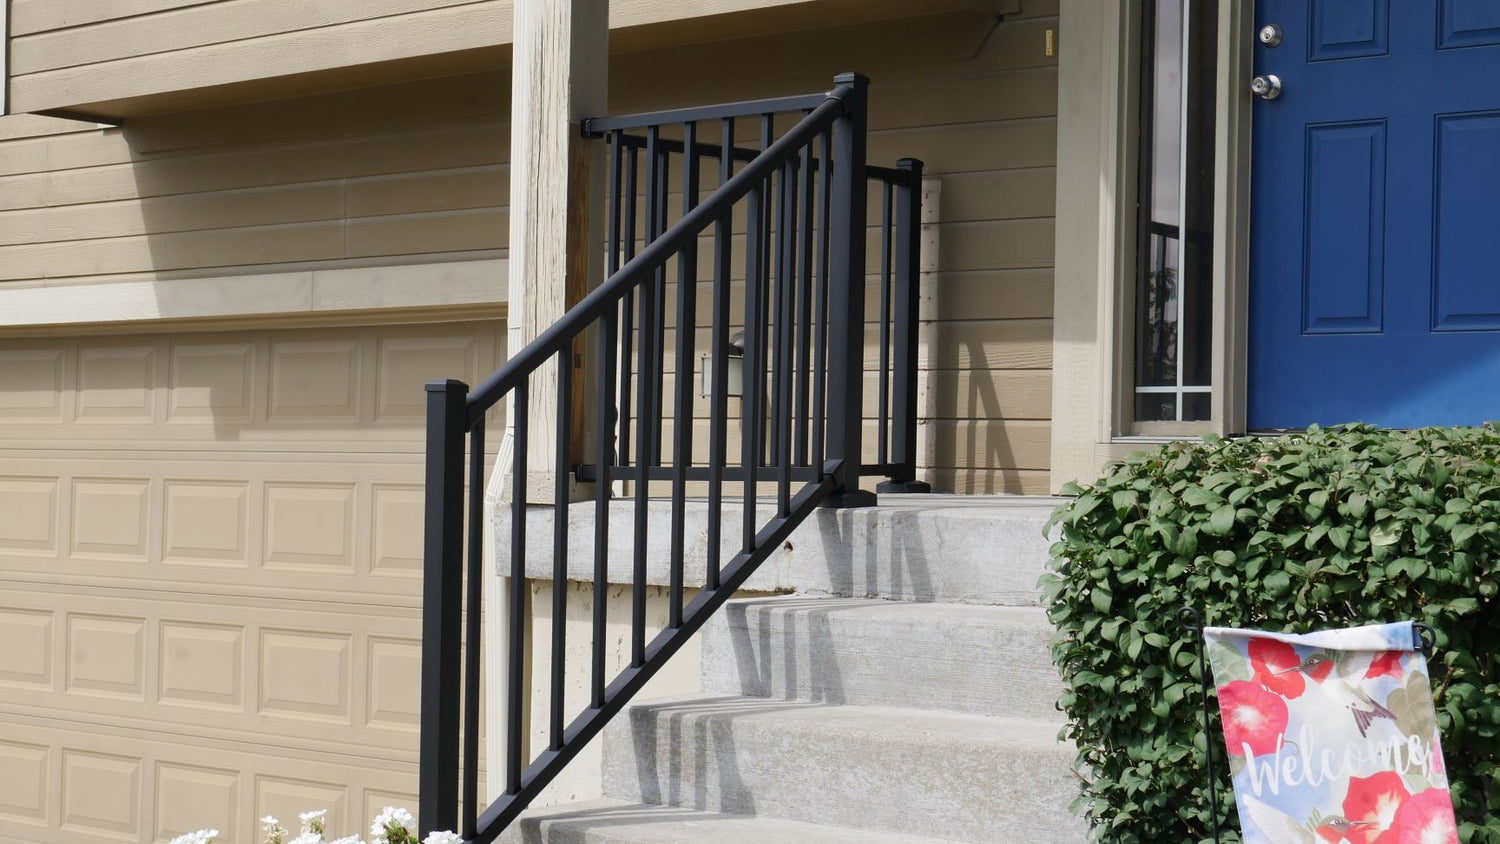 Tuscany C10 Stair rail between 2"x2" posts and level rail on the landing tuscany c10 stair kits come with fixed pitched stair mount brackets